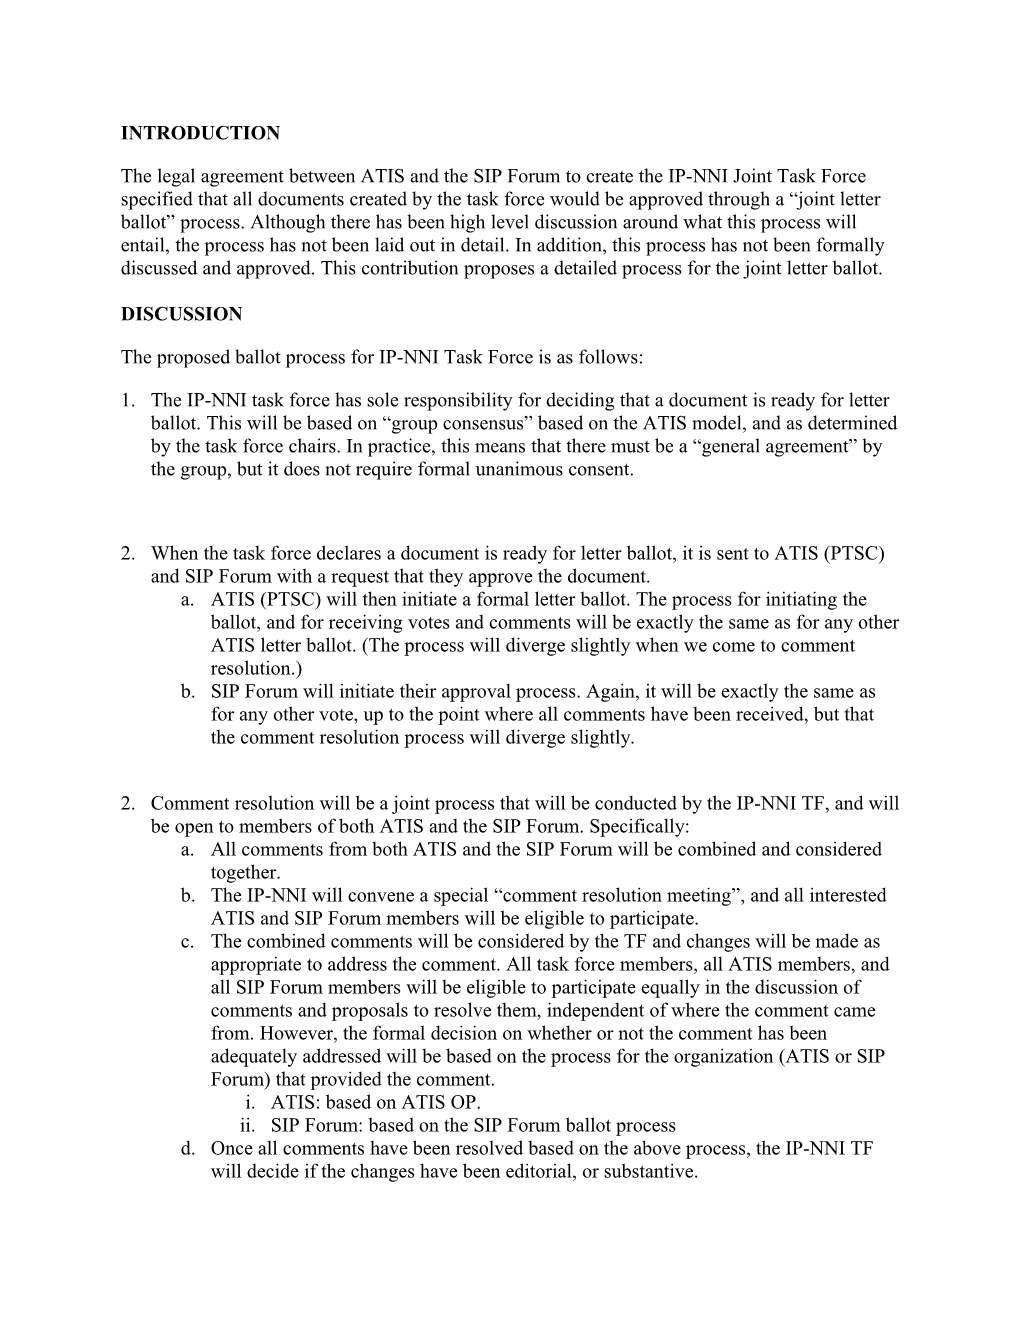 TITLE: Proposed Letter Ballot Process for ATIS/SIP Forum IP-NNI Task Force Documents